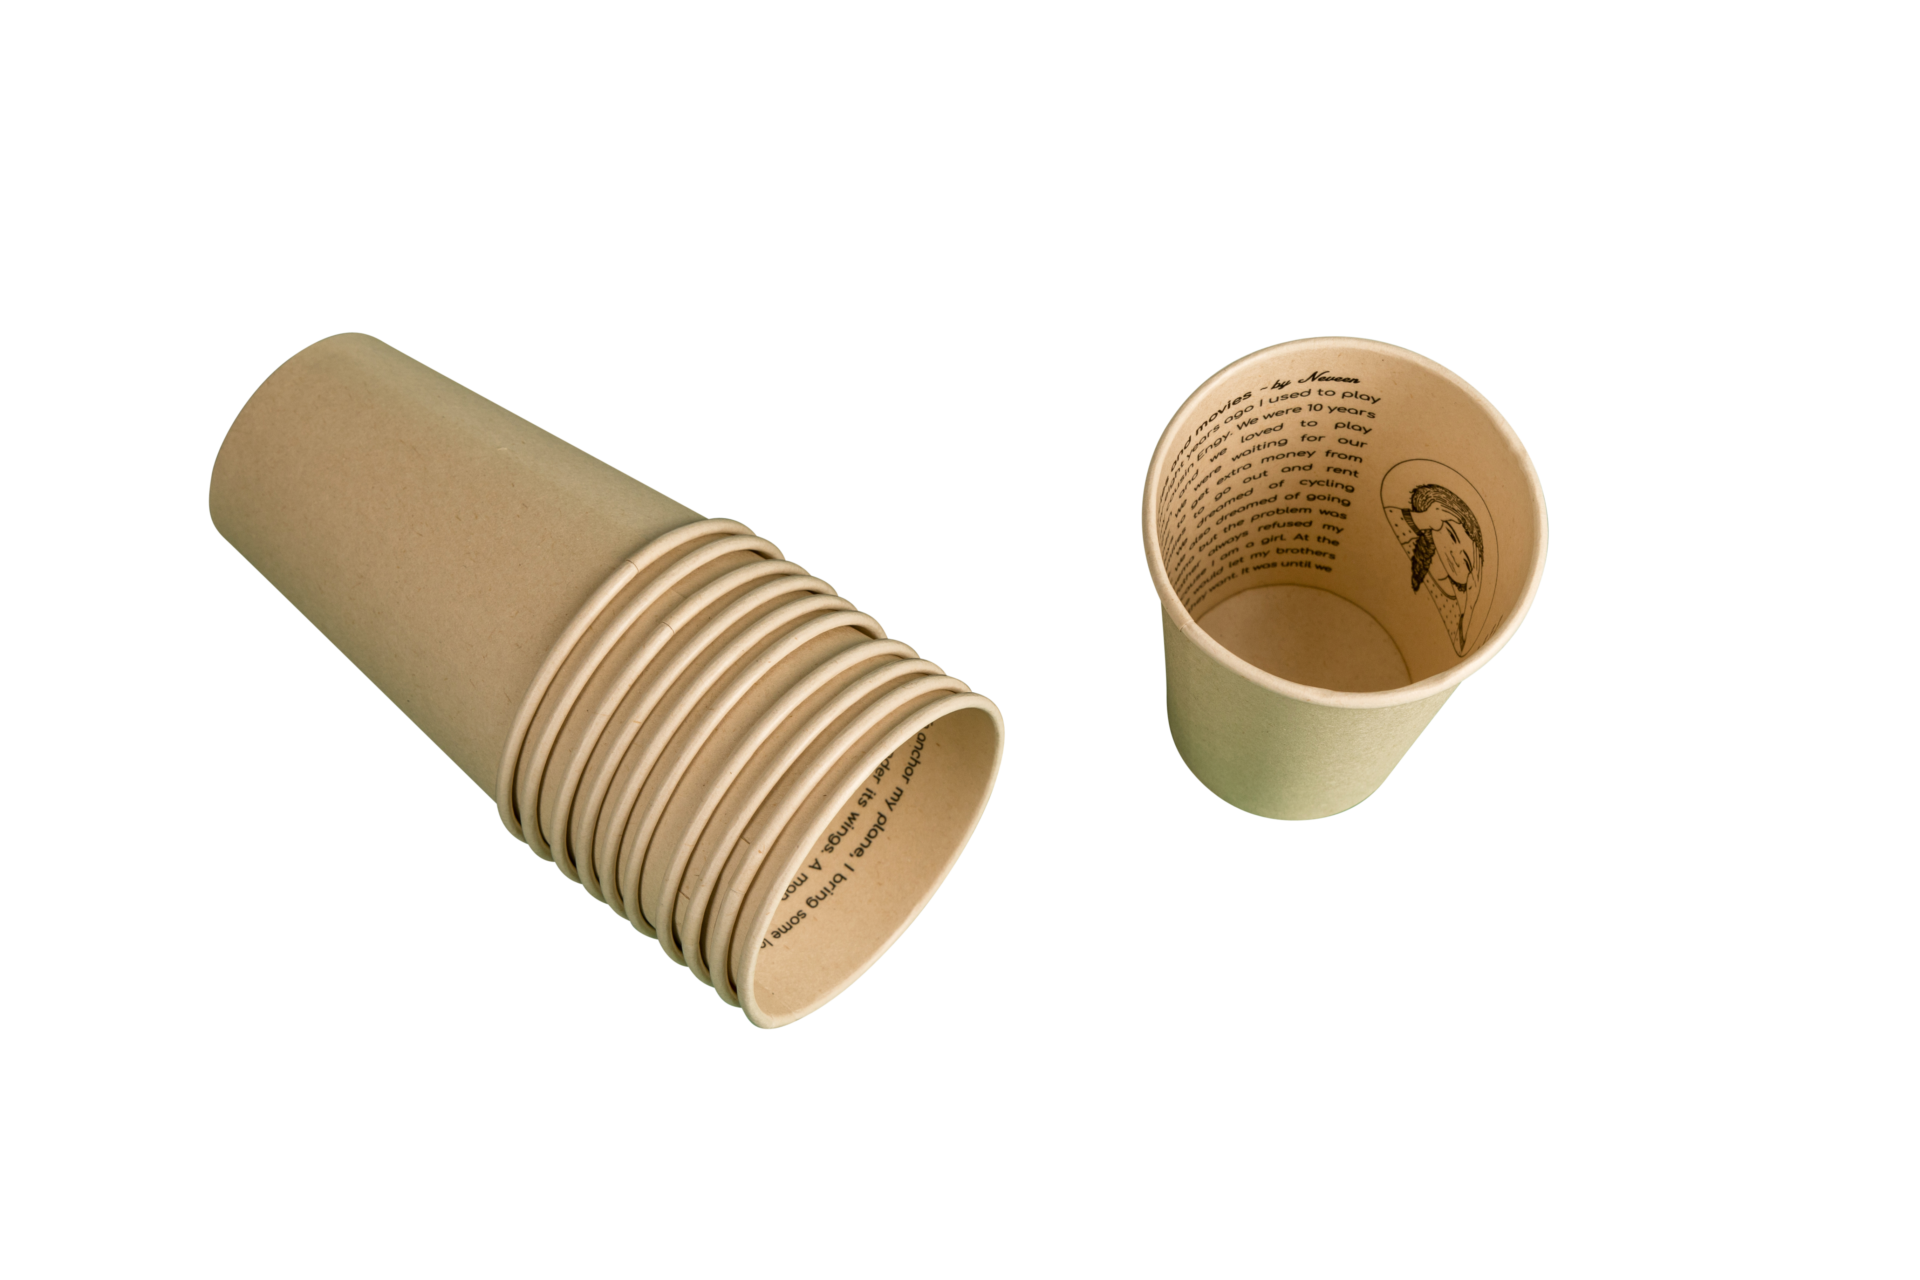 wp content uploads  0   0   eco bio cups drinks coffee tea water disposable compostable paper board insideprinting packaging office promo  c